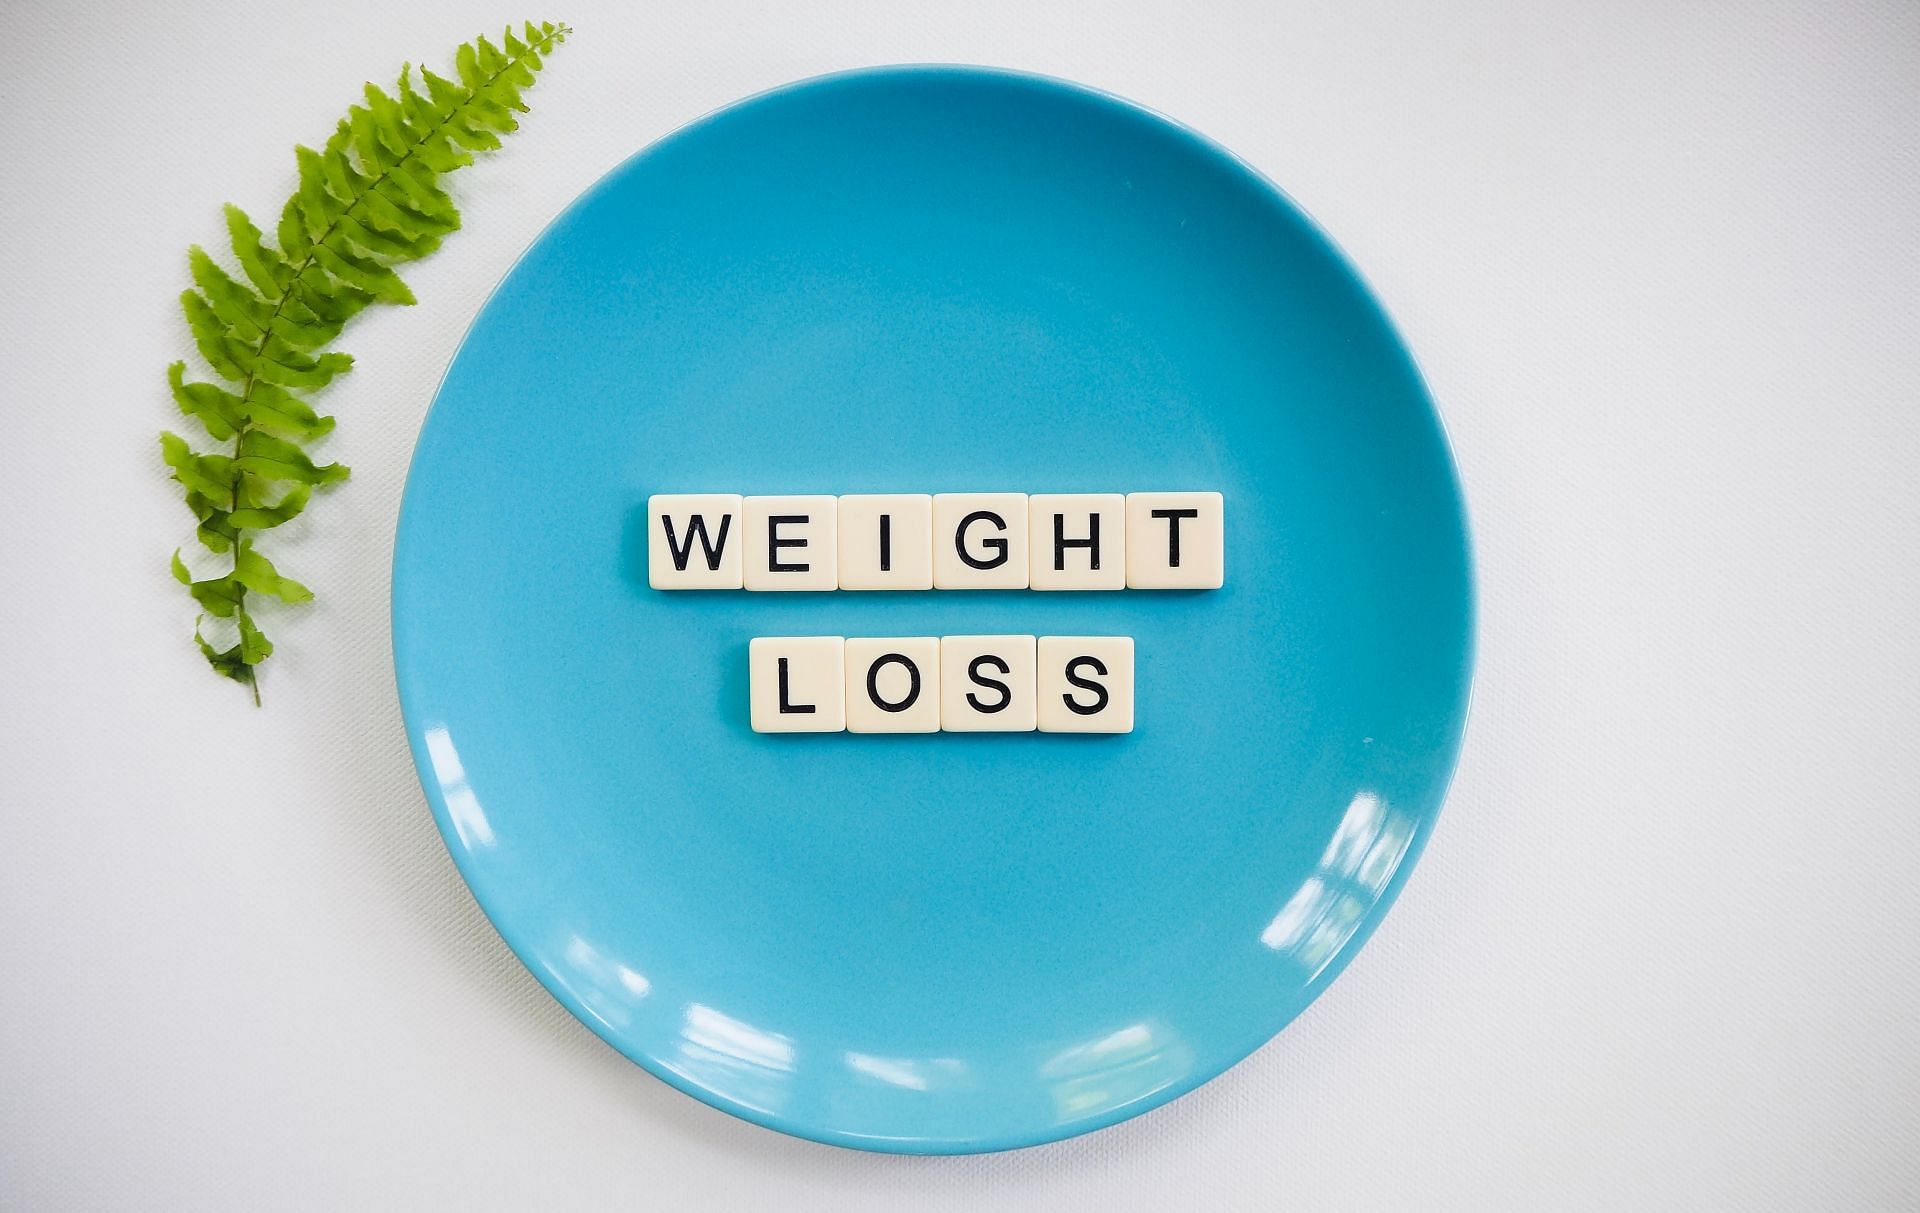 Wedding weight loss tips (image sourced via Pexels / Photo by total shape)